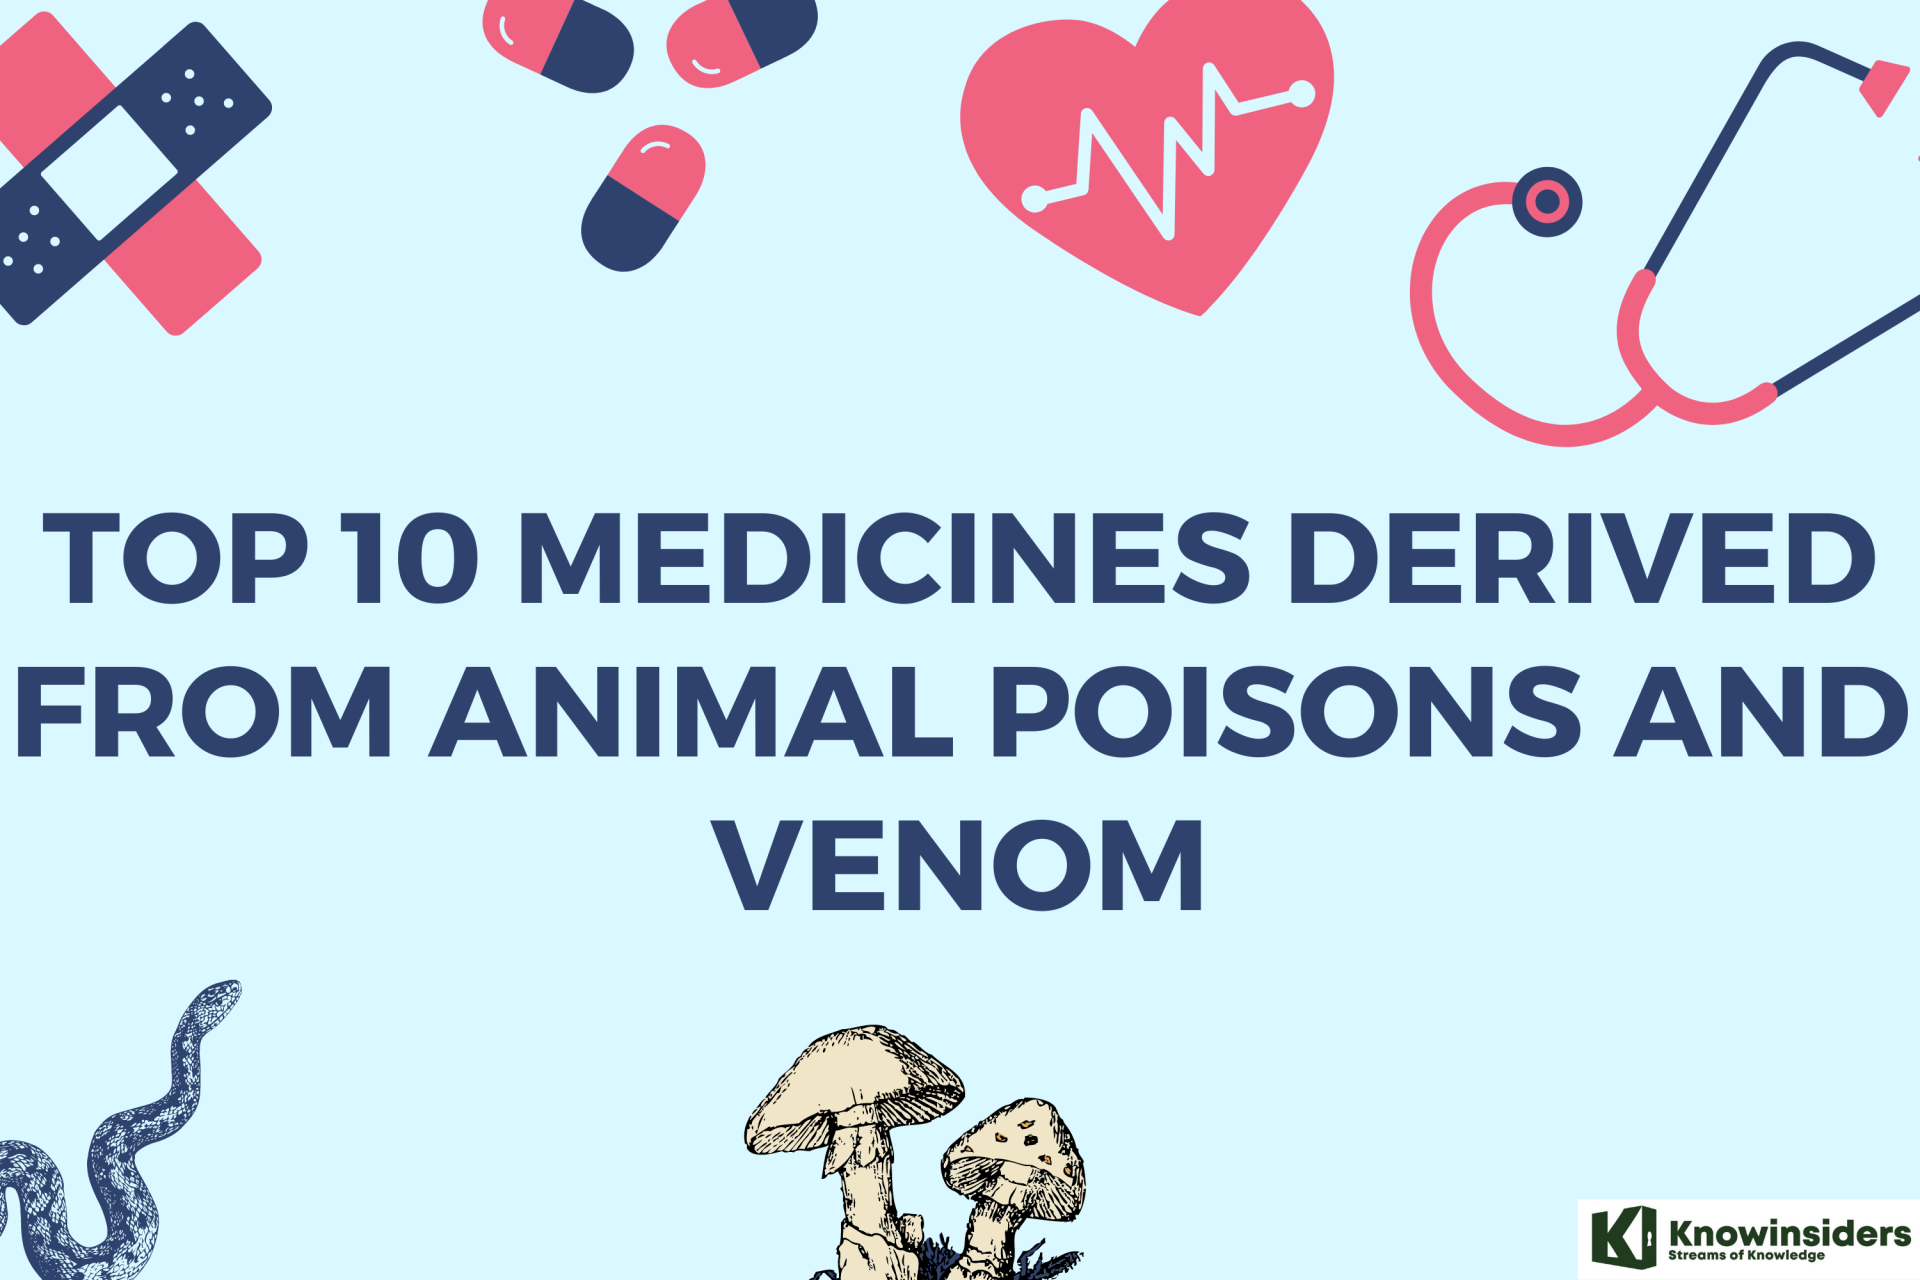 Top 10 Medicines Derived From Animal Poisons and Venom